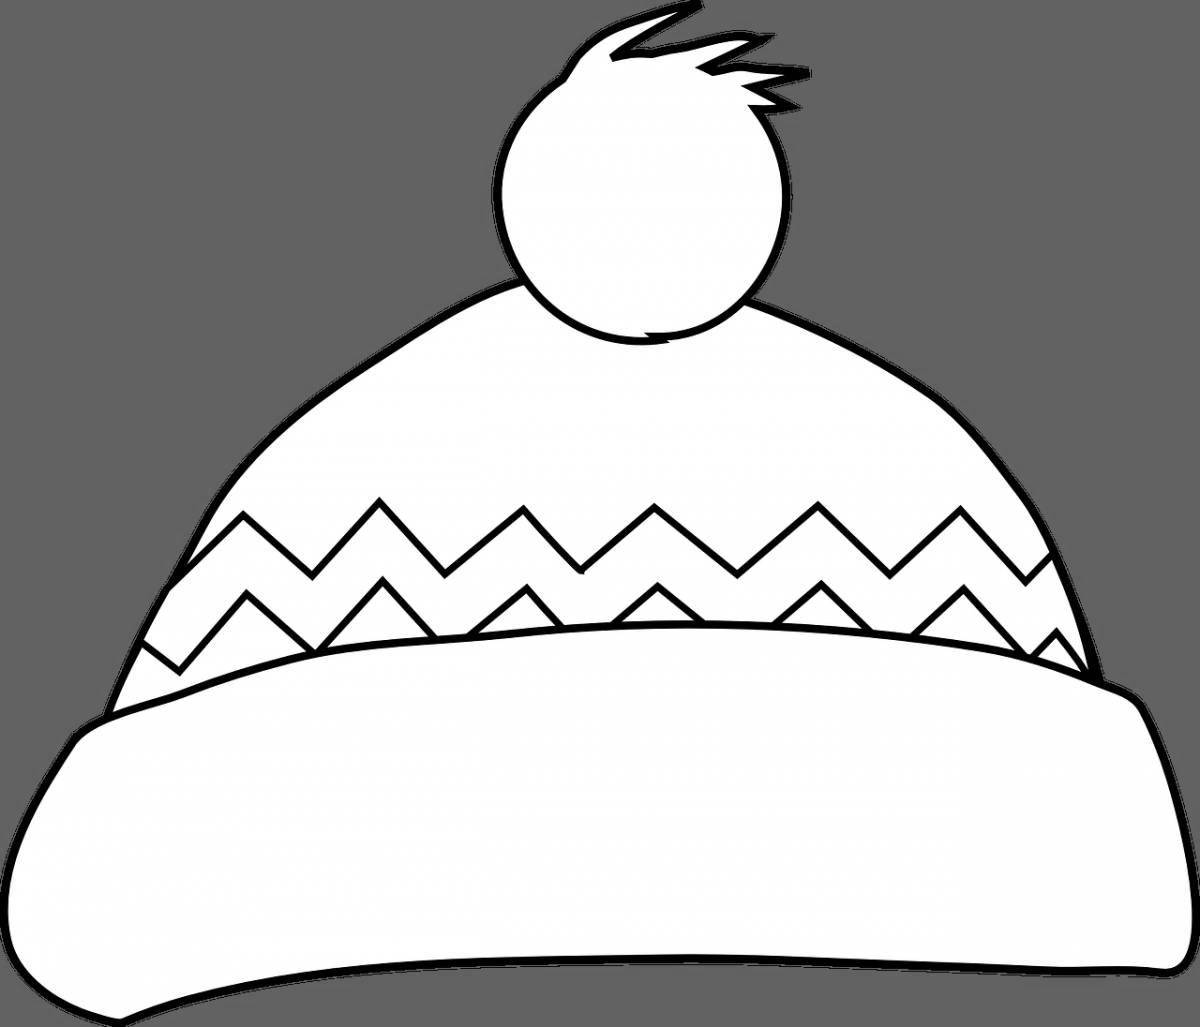 Humorous hat and scarf coloring book